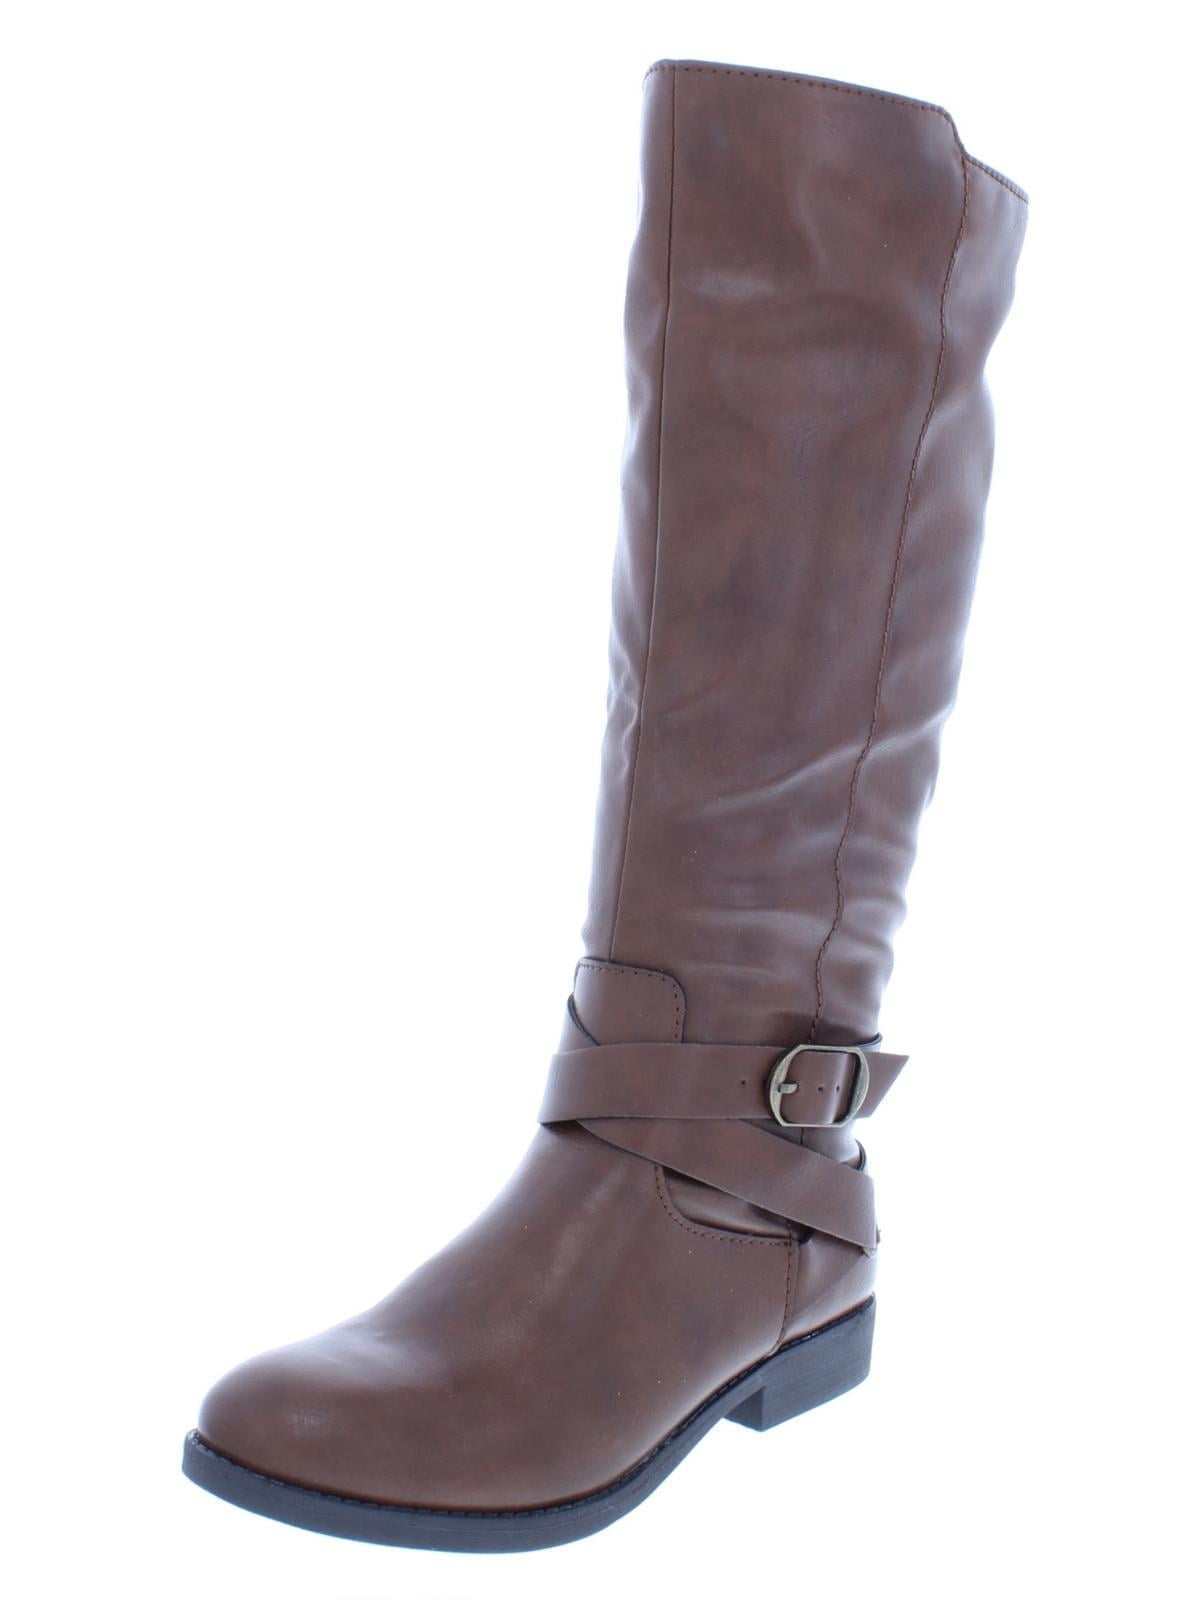 style & co riding boots